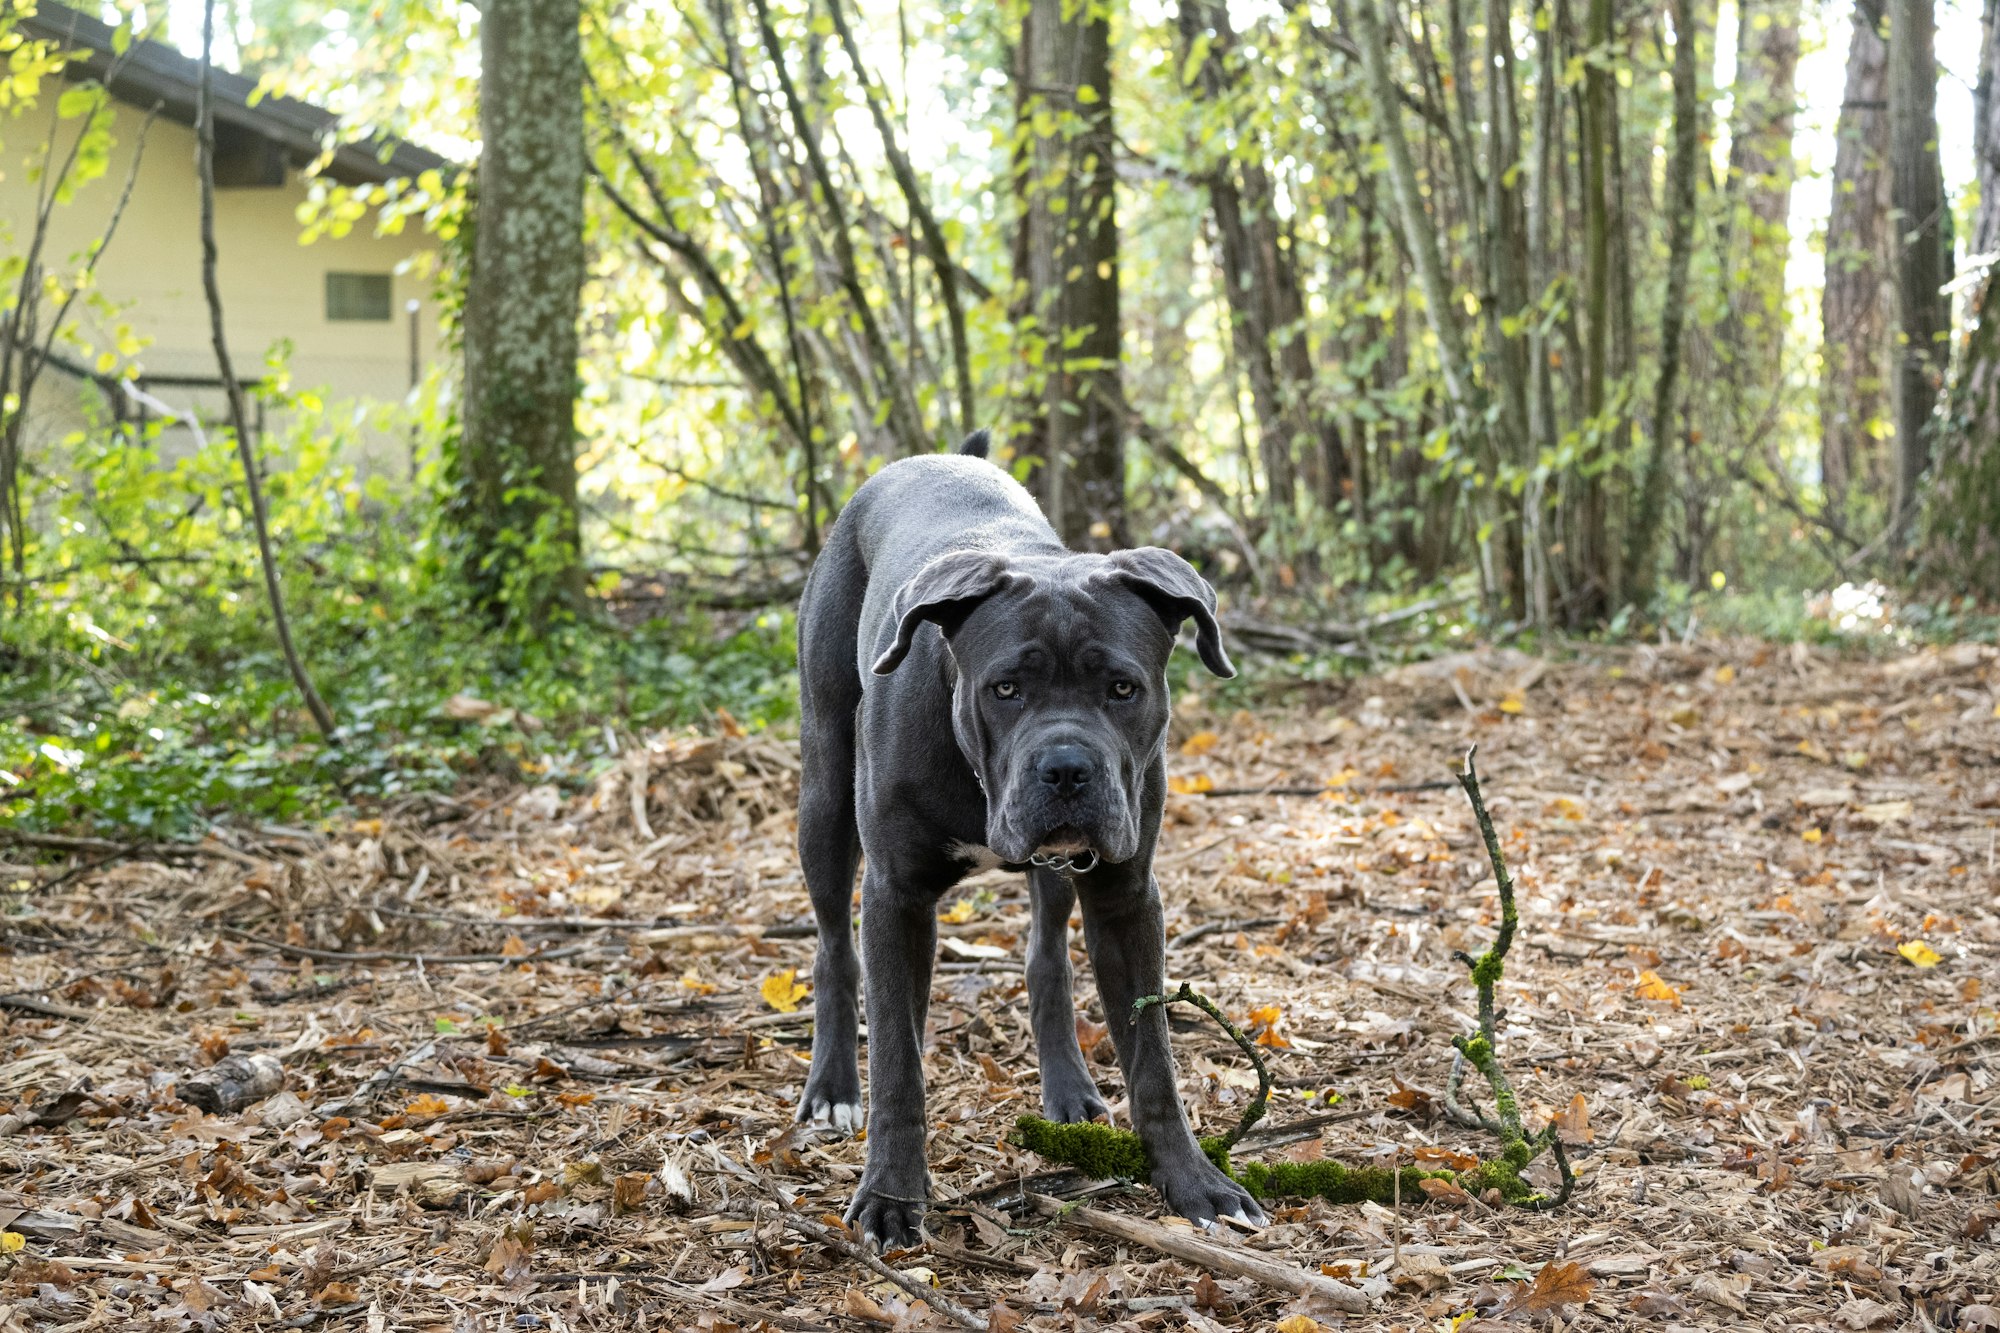 How much does a cane Corso cost